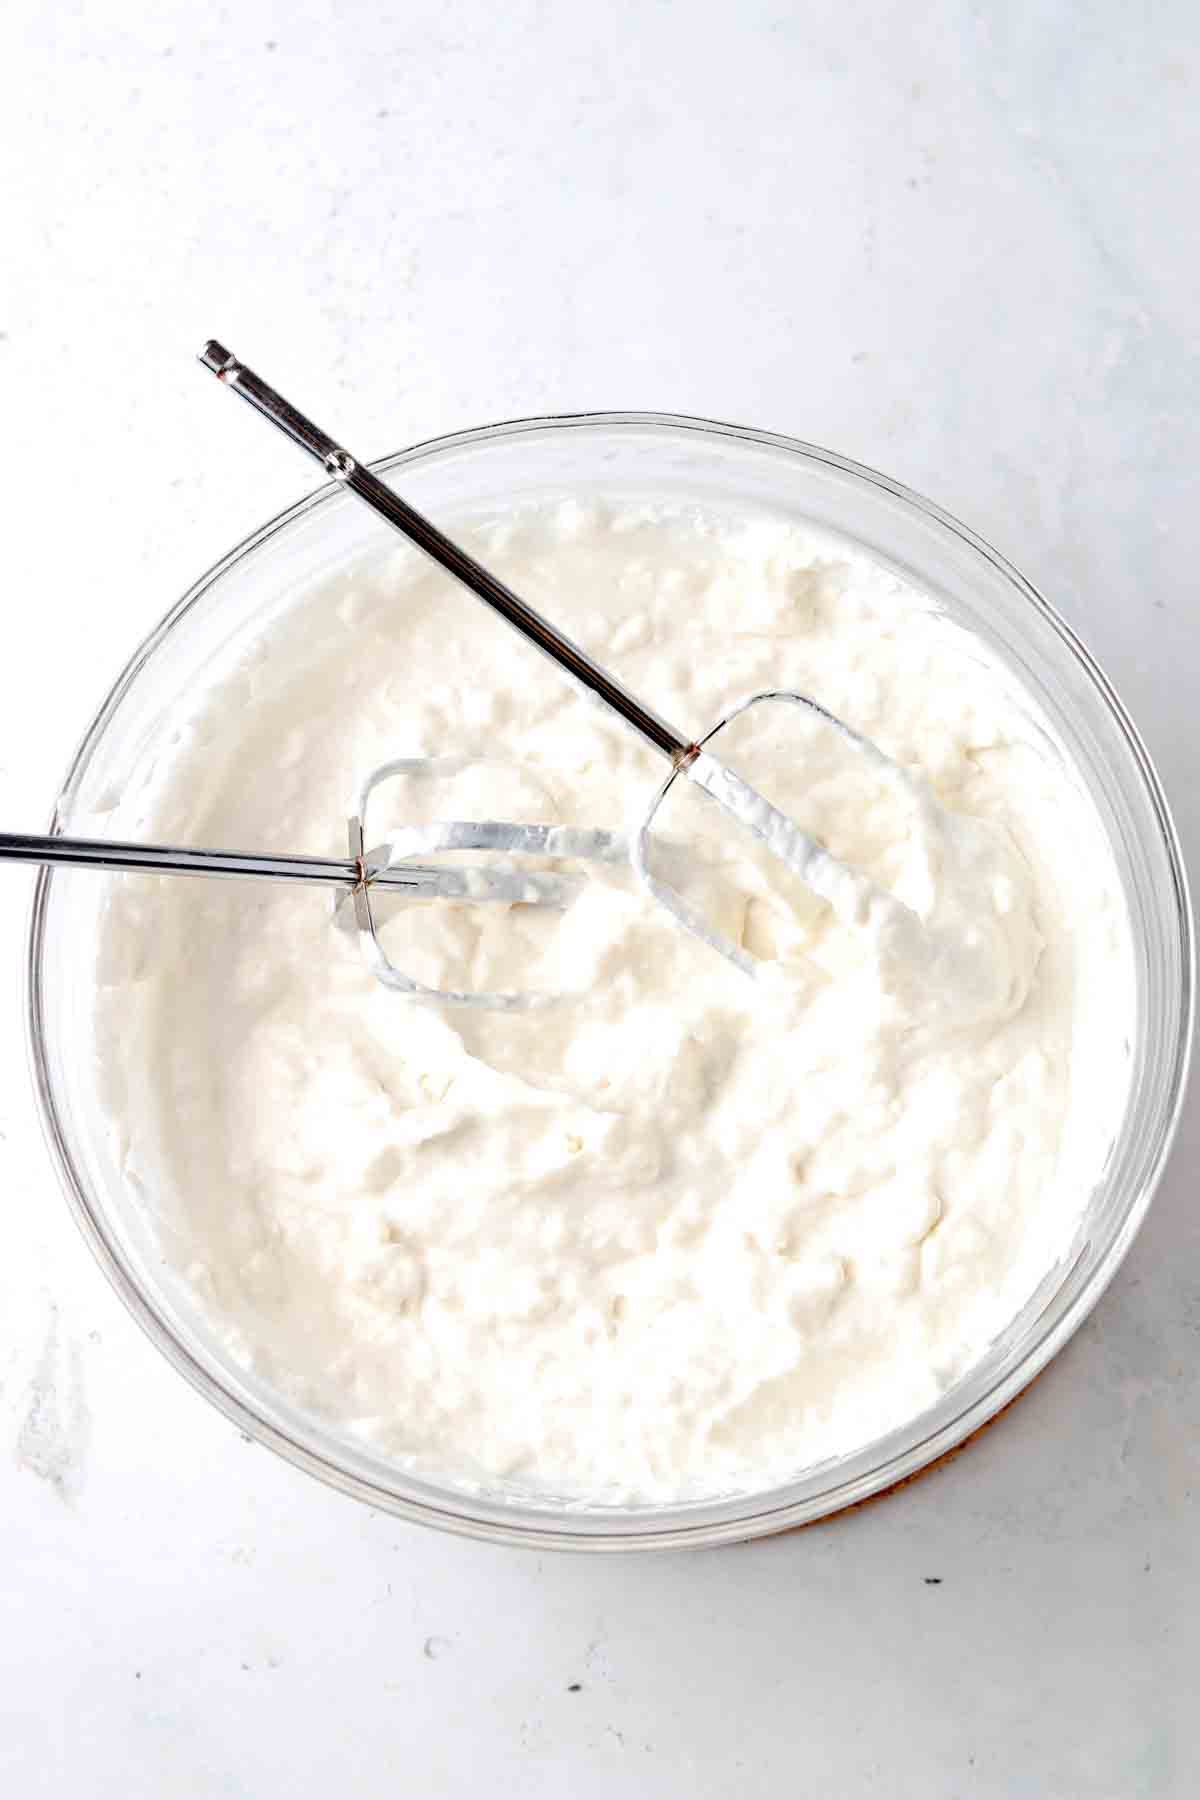 Whipped cream and cream cheese in a bowl.